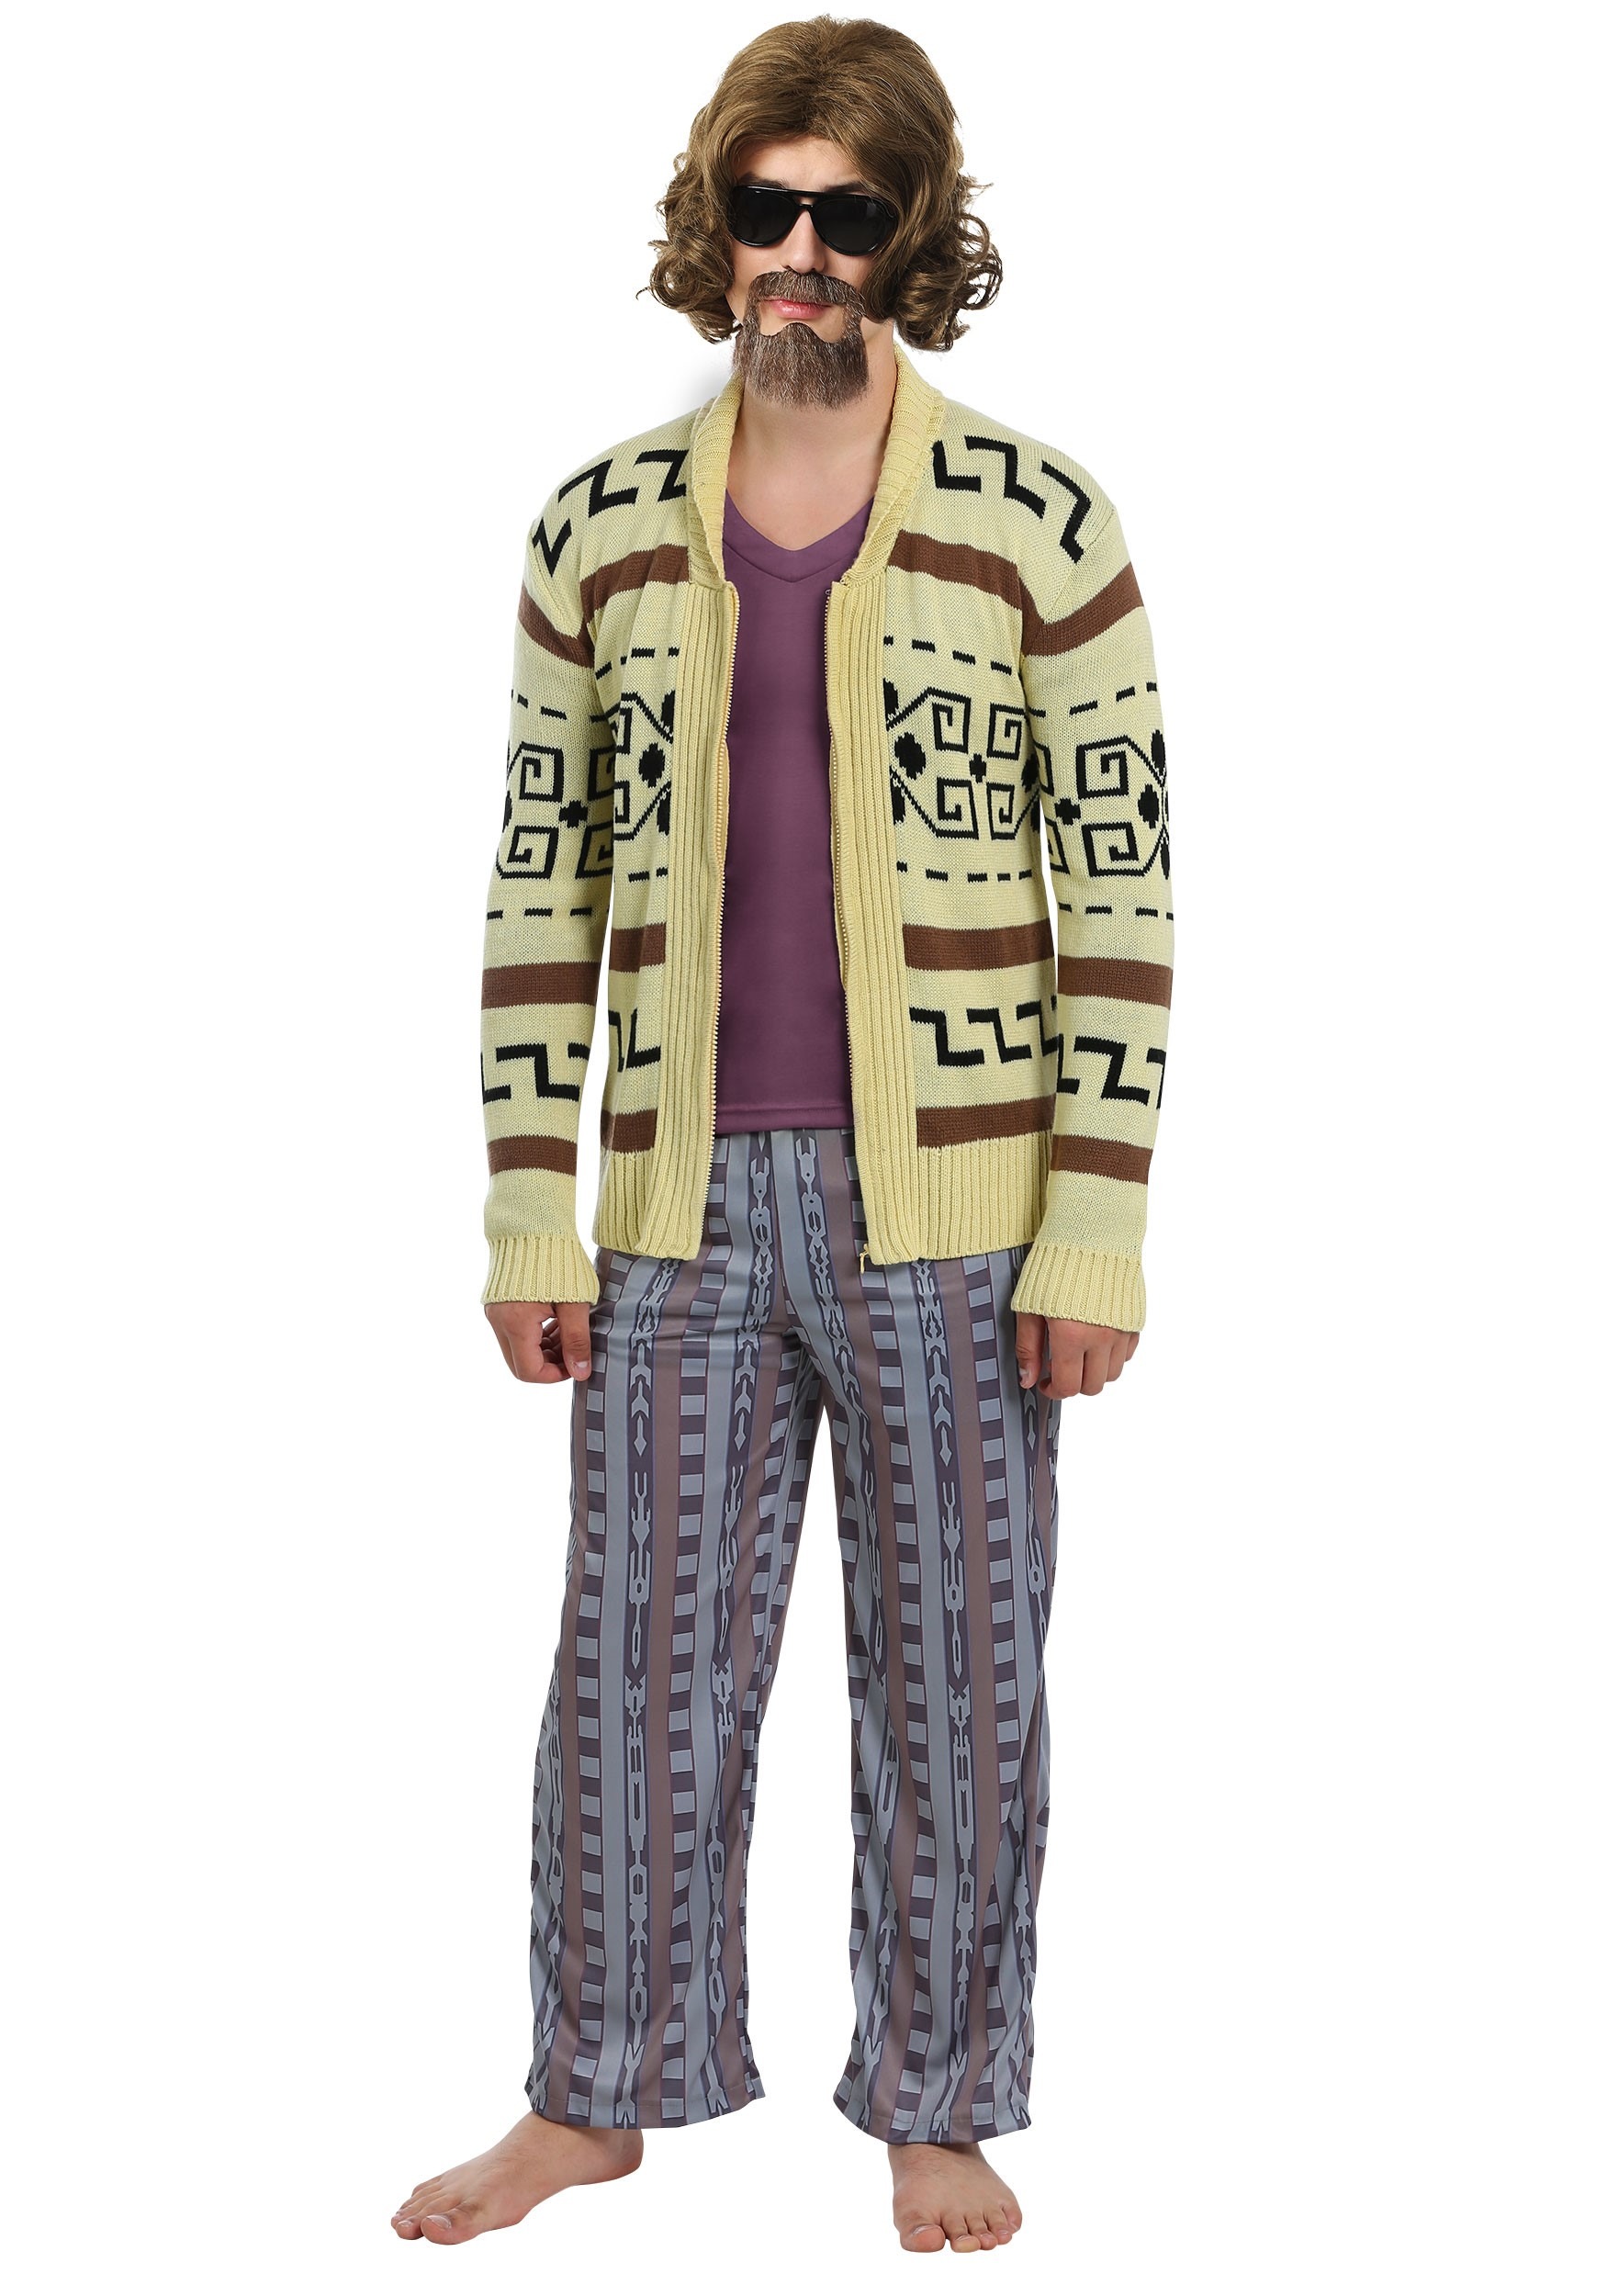 Image of FUN Costumes Big Lebowski The Dude Sweater Costume for Men | Movie Costumes